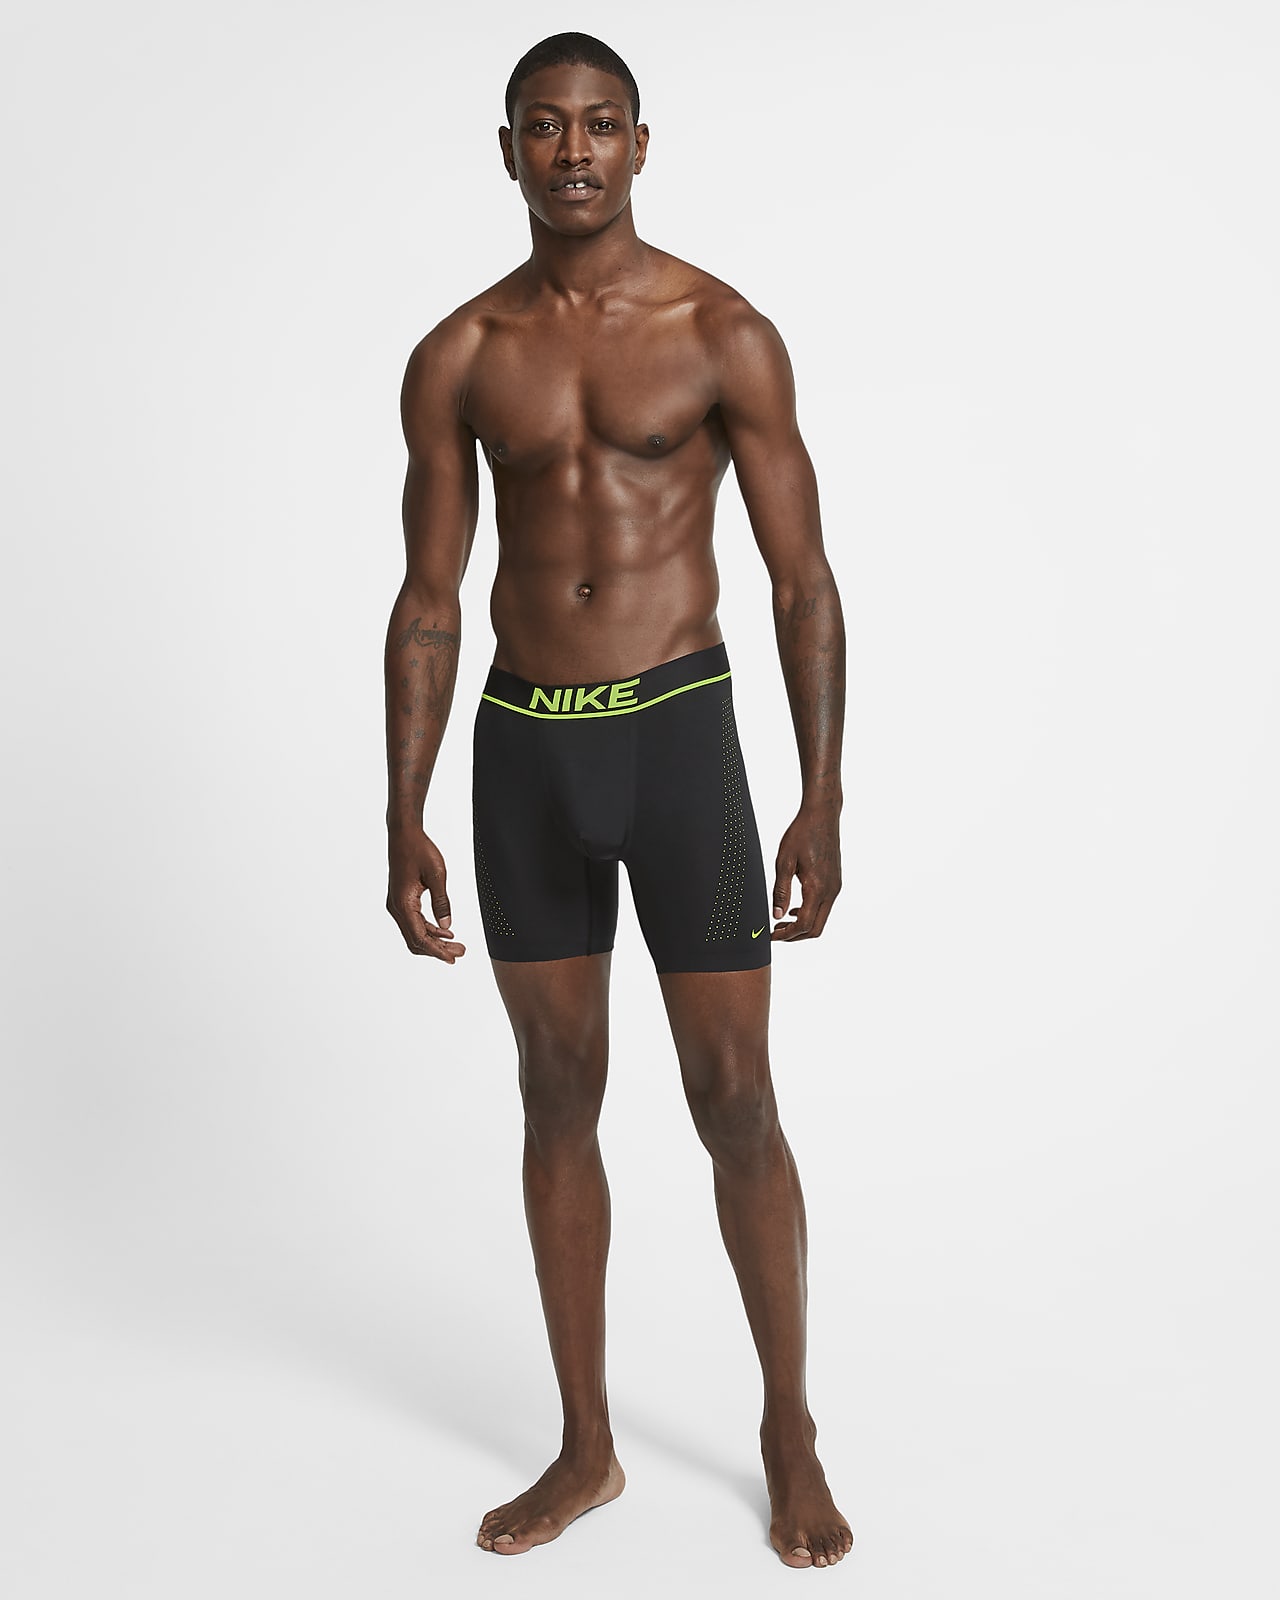 Buy > nike pro training boxer briefs > in stock